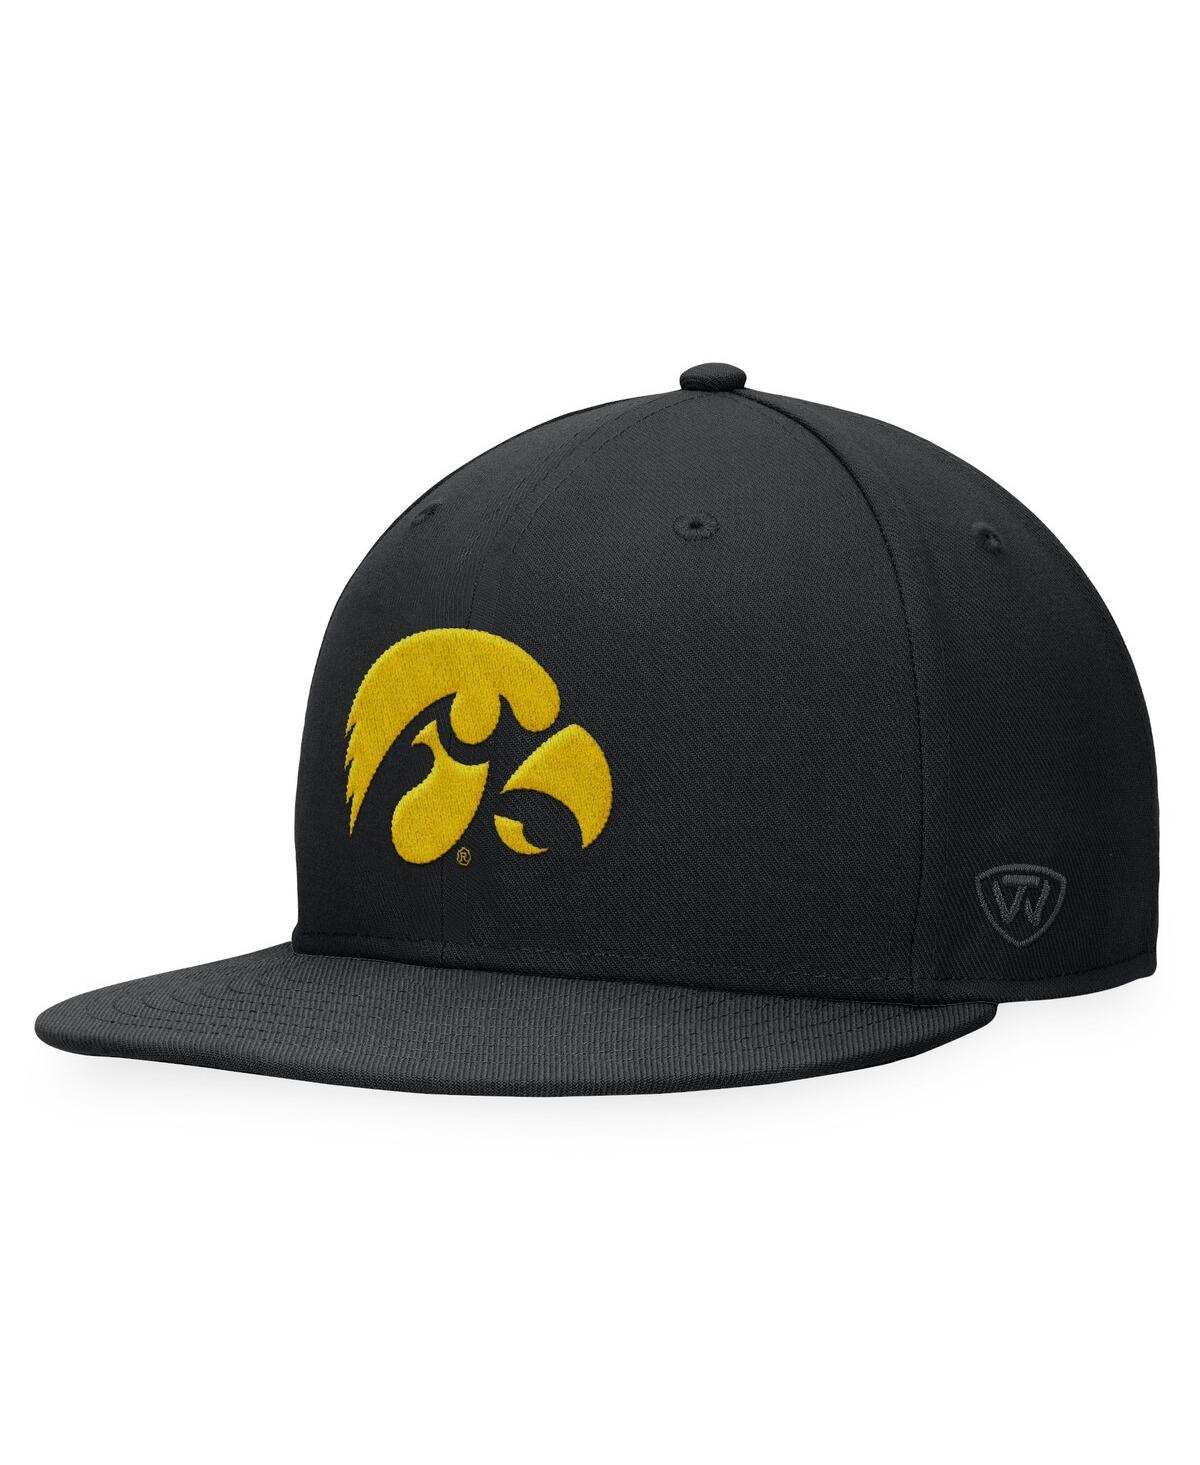 Men's Top of the World Black Iowa Hawkeyes Fitted Hat - Black